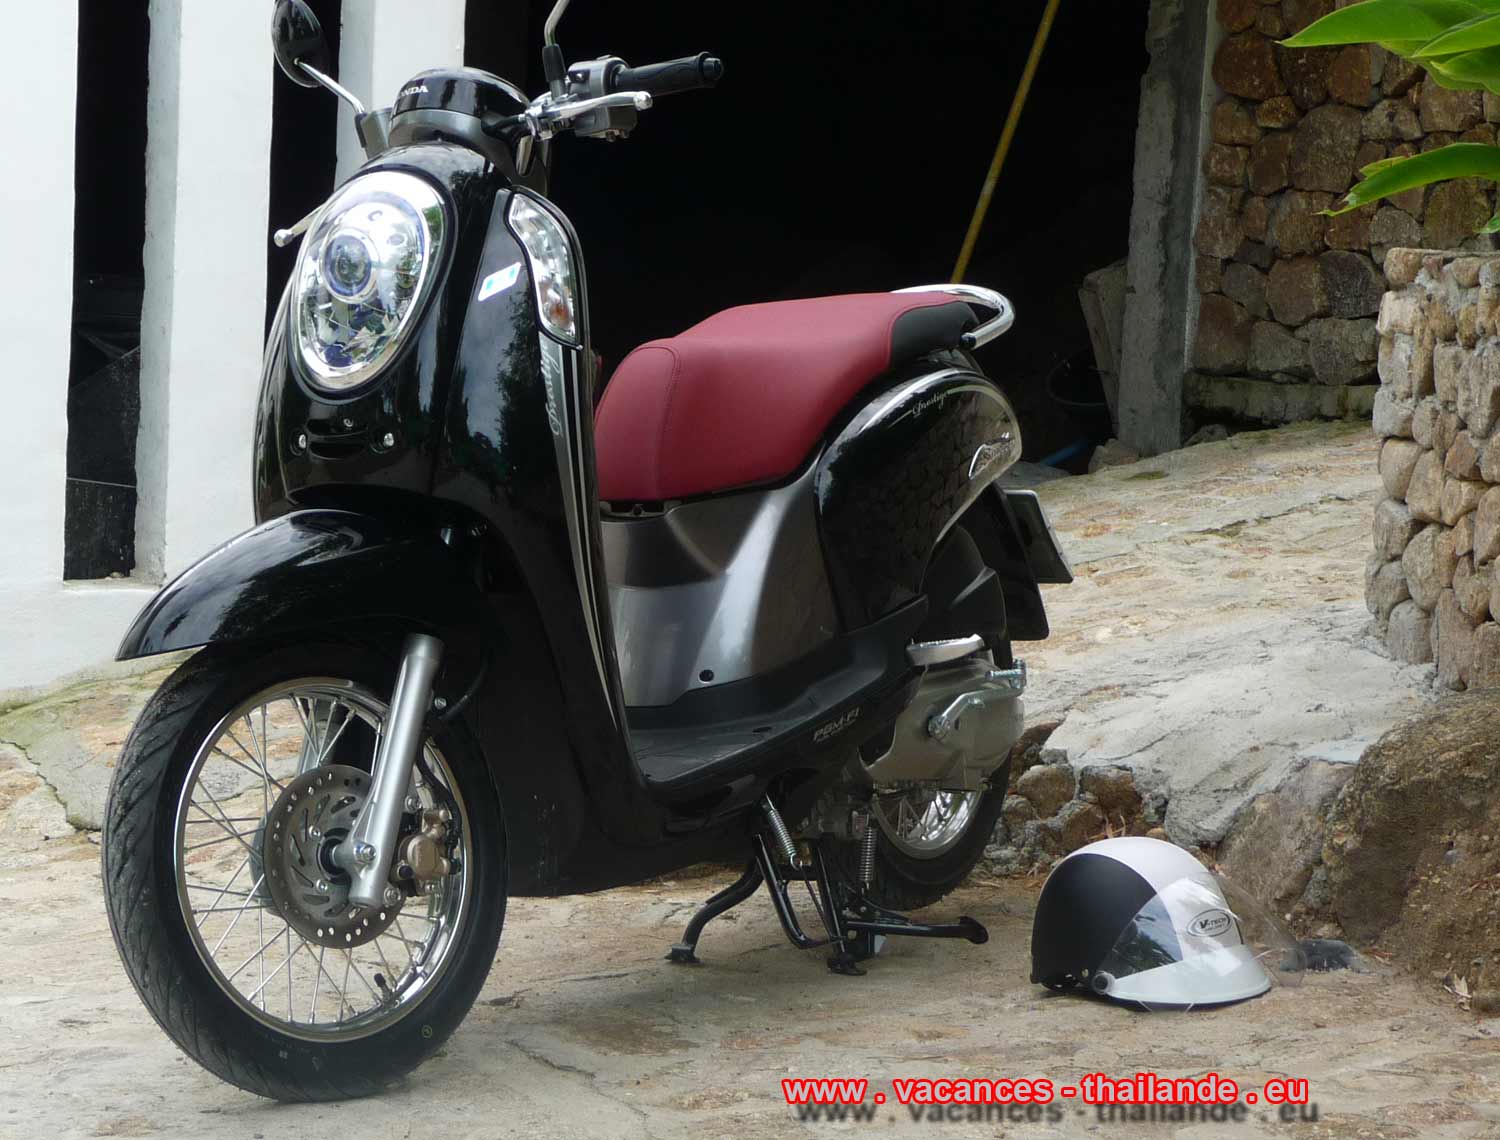 p32 scooters Honda leased the house and are available on arrival and especially without formalities so called resting ansi that helmets has samui koh thailand